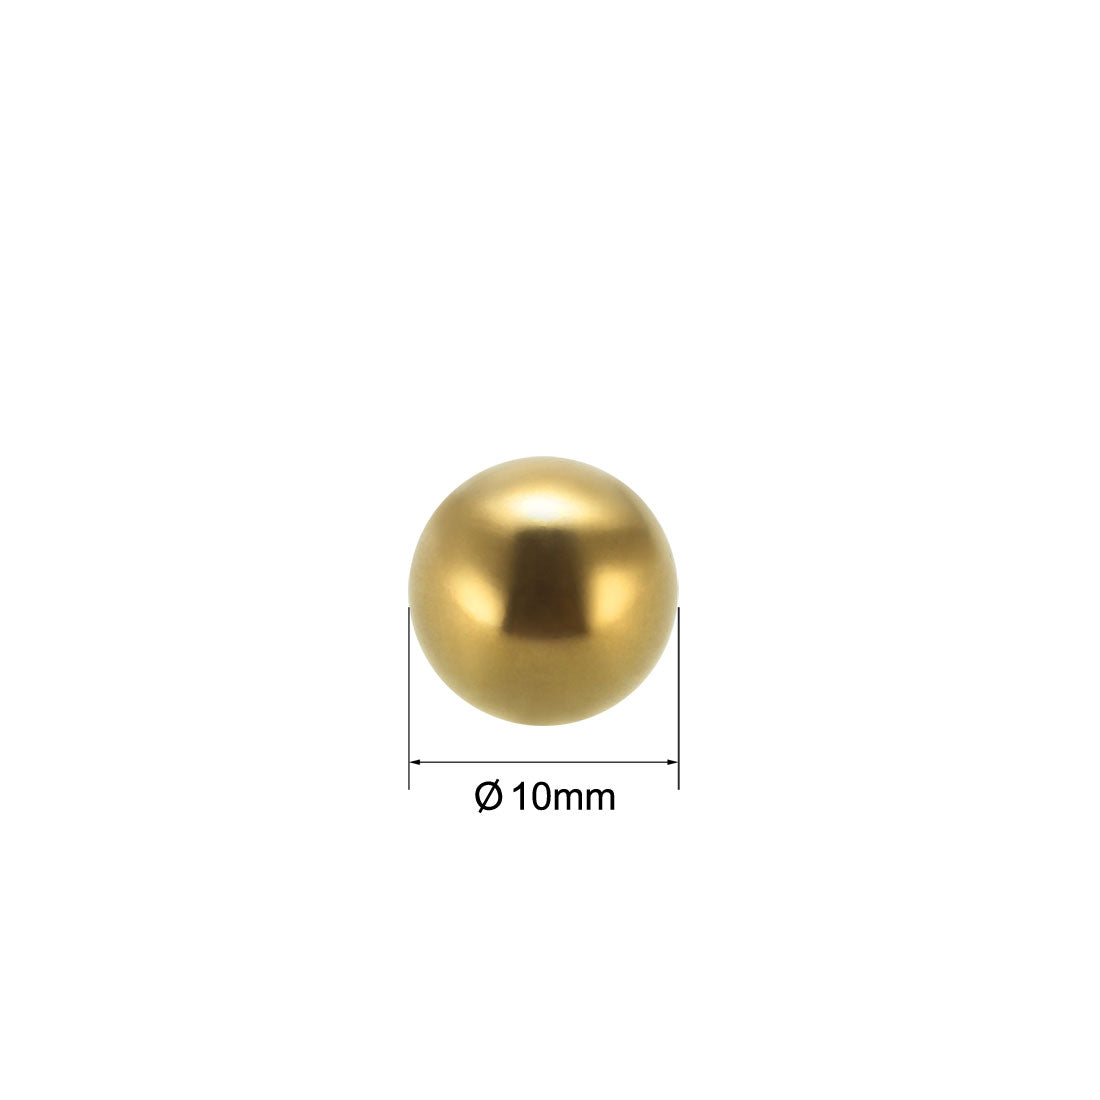 Uxcell Uxcell 4.5mm Precision Solid Brass Bearing Balls 50pcs